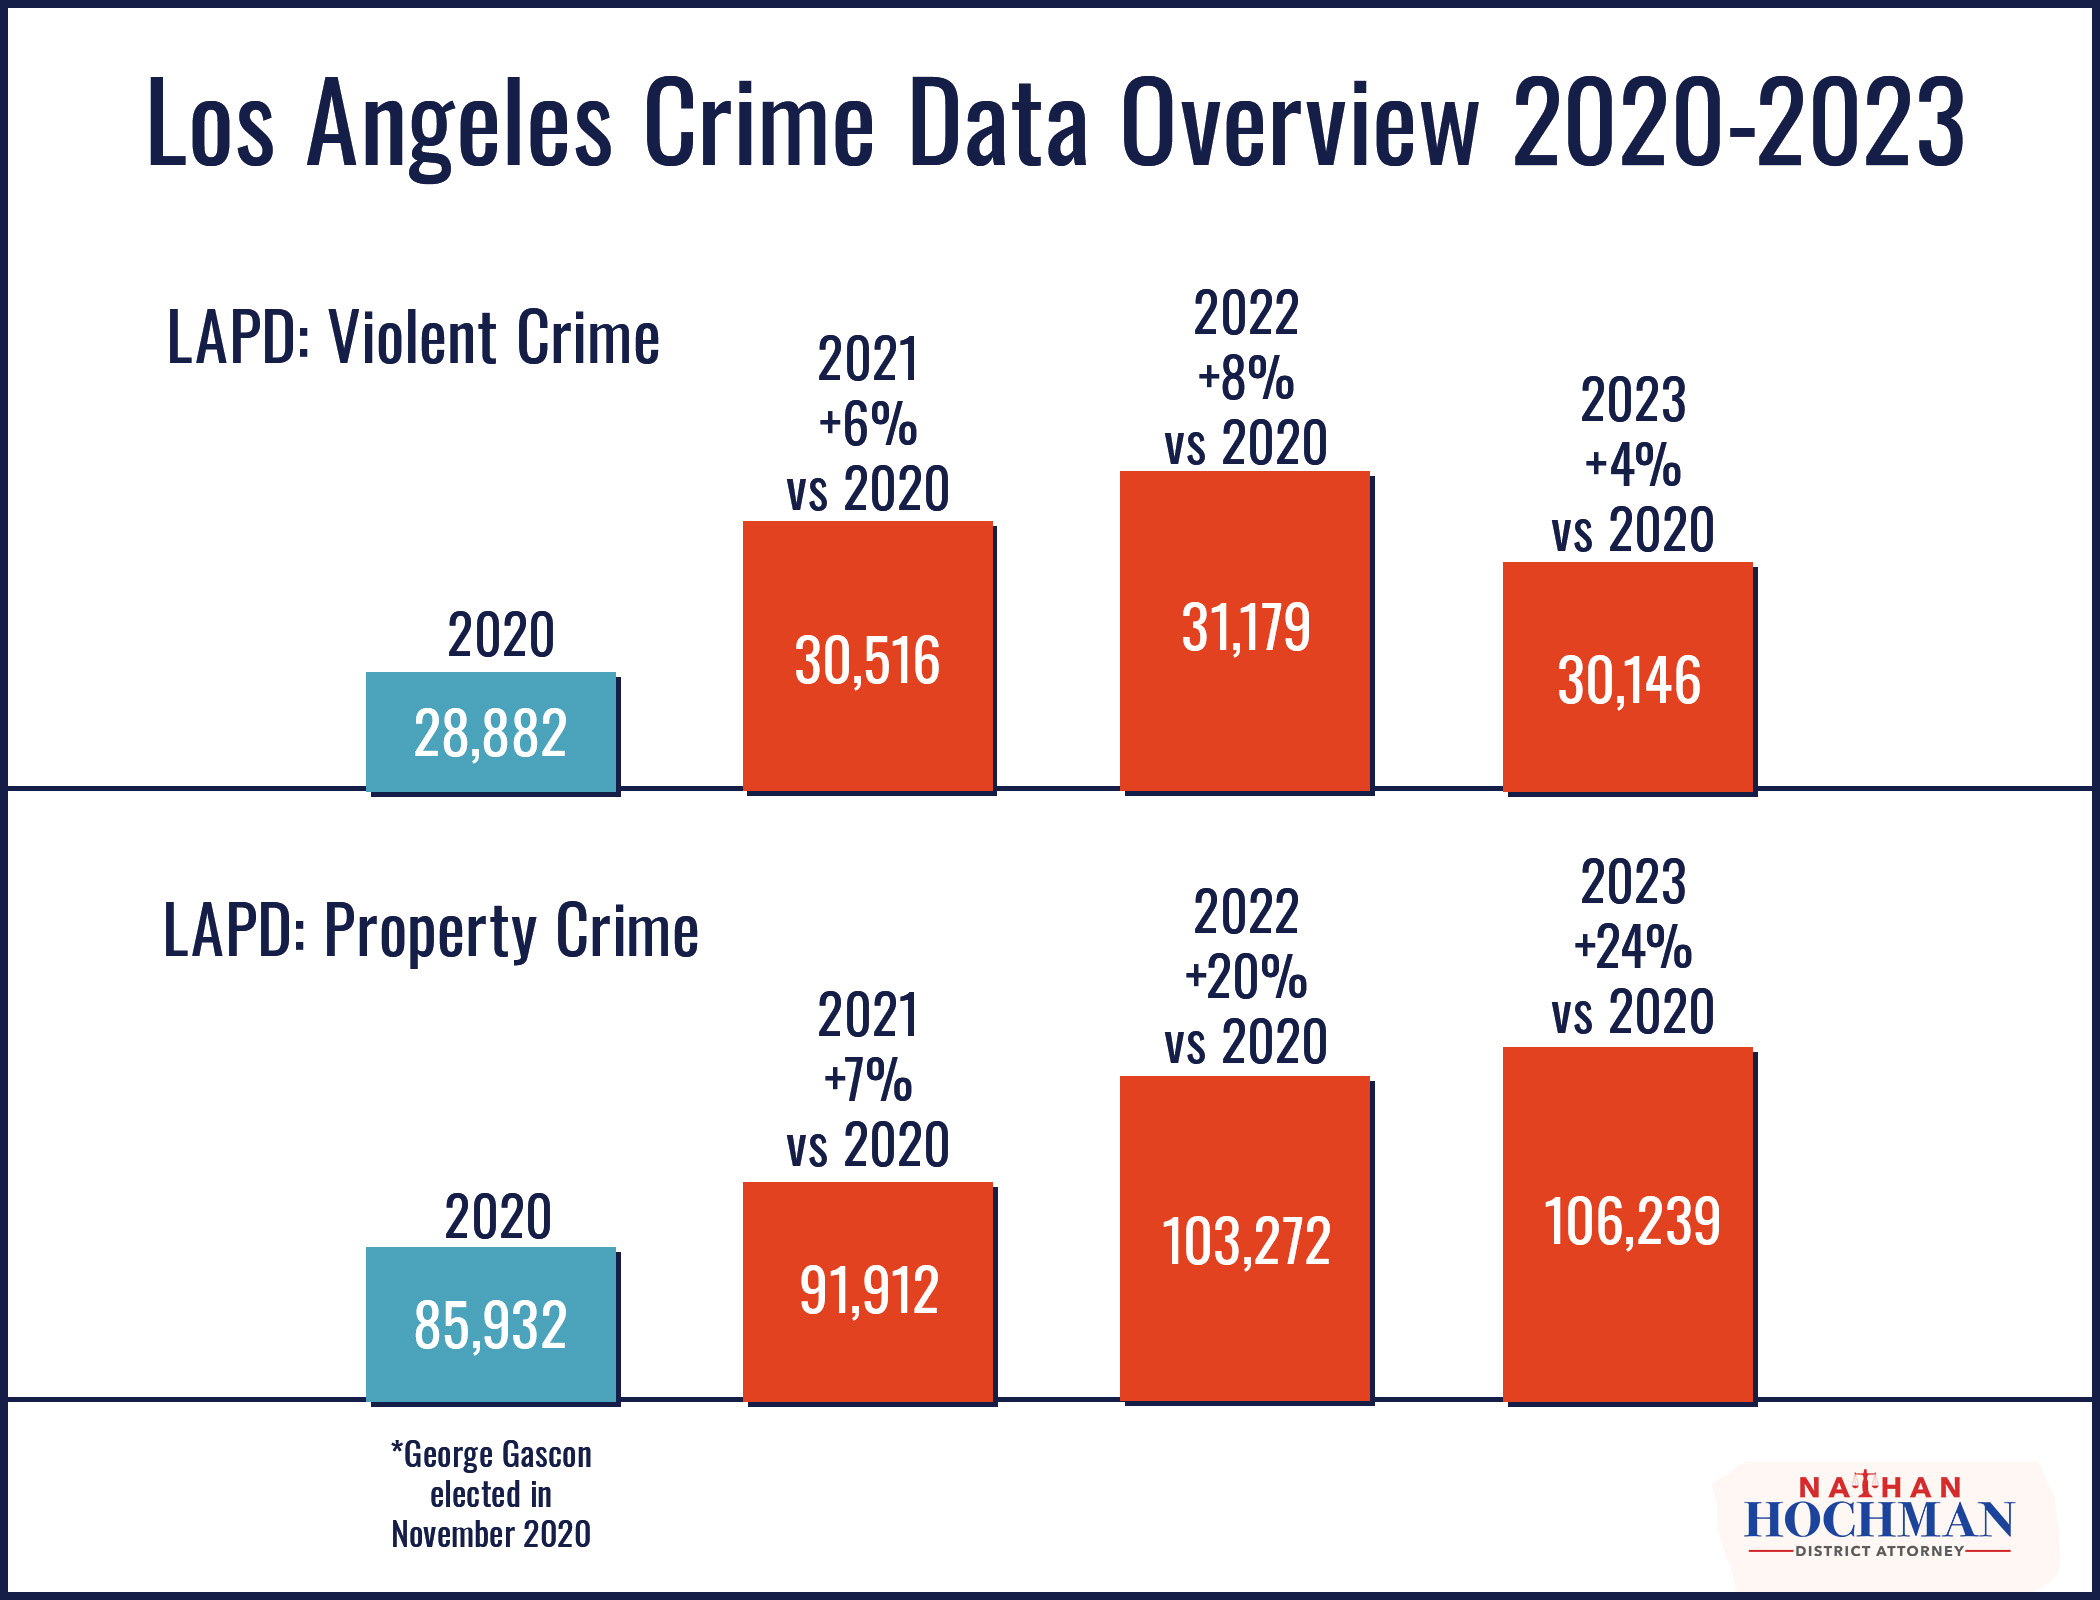 Los Angeles Crime Data Overview graphs 2020-2023